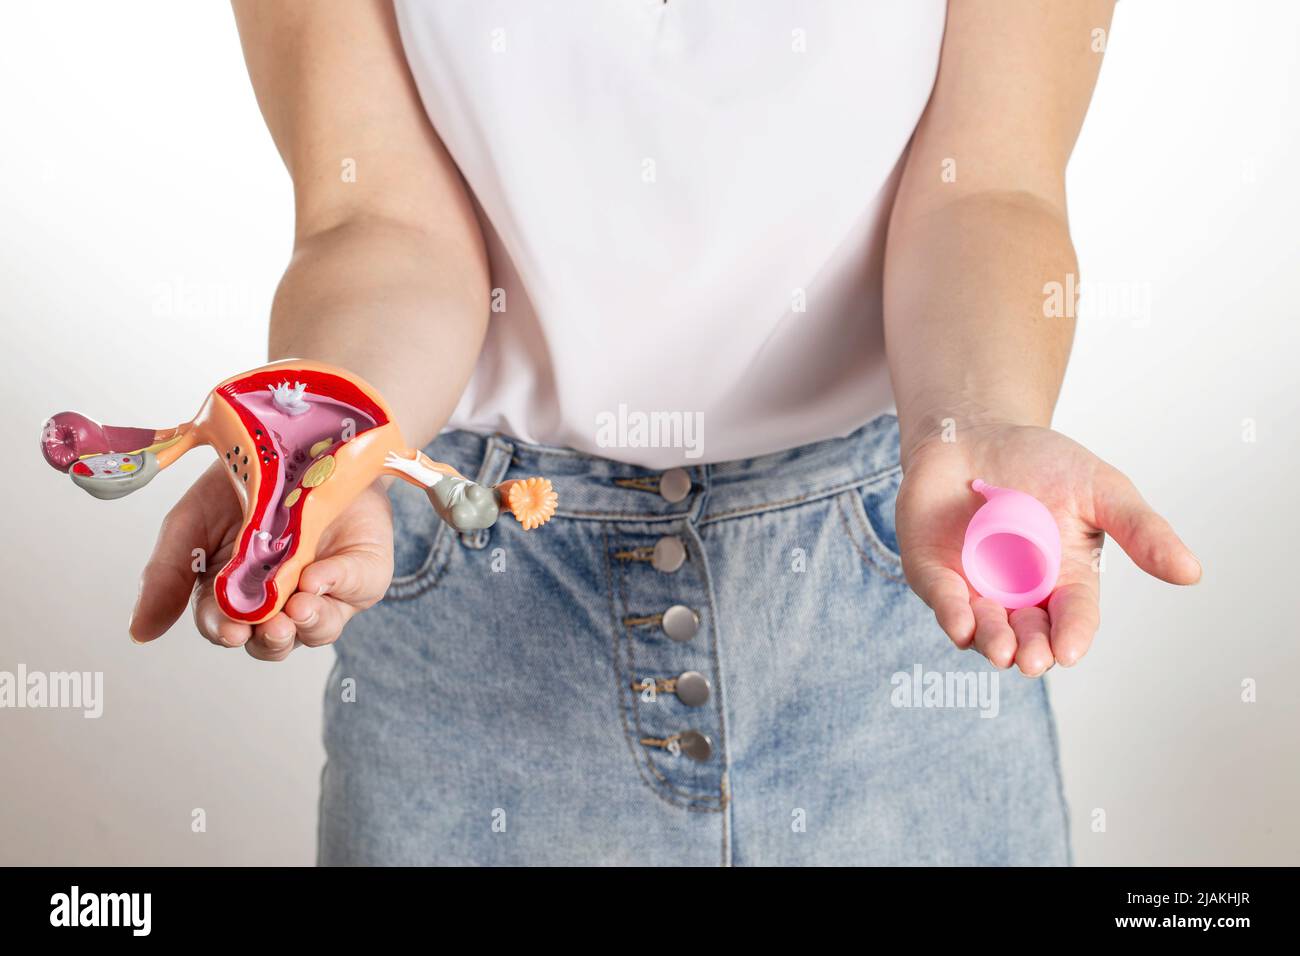 A girl holds in one hand a medical model of the female reproductive system and suddenly a menstrual cup to collect discharge during menstruation Stock Photo